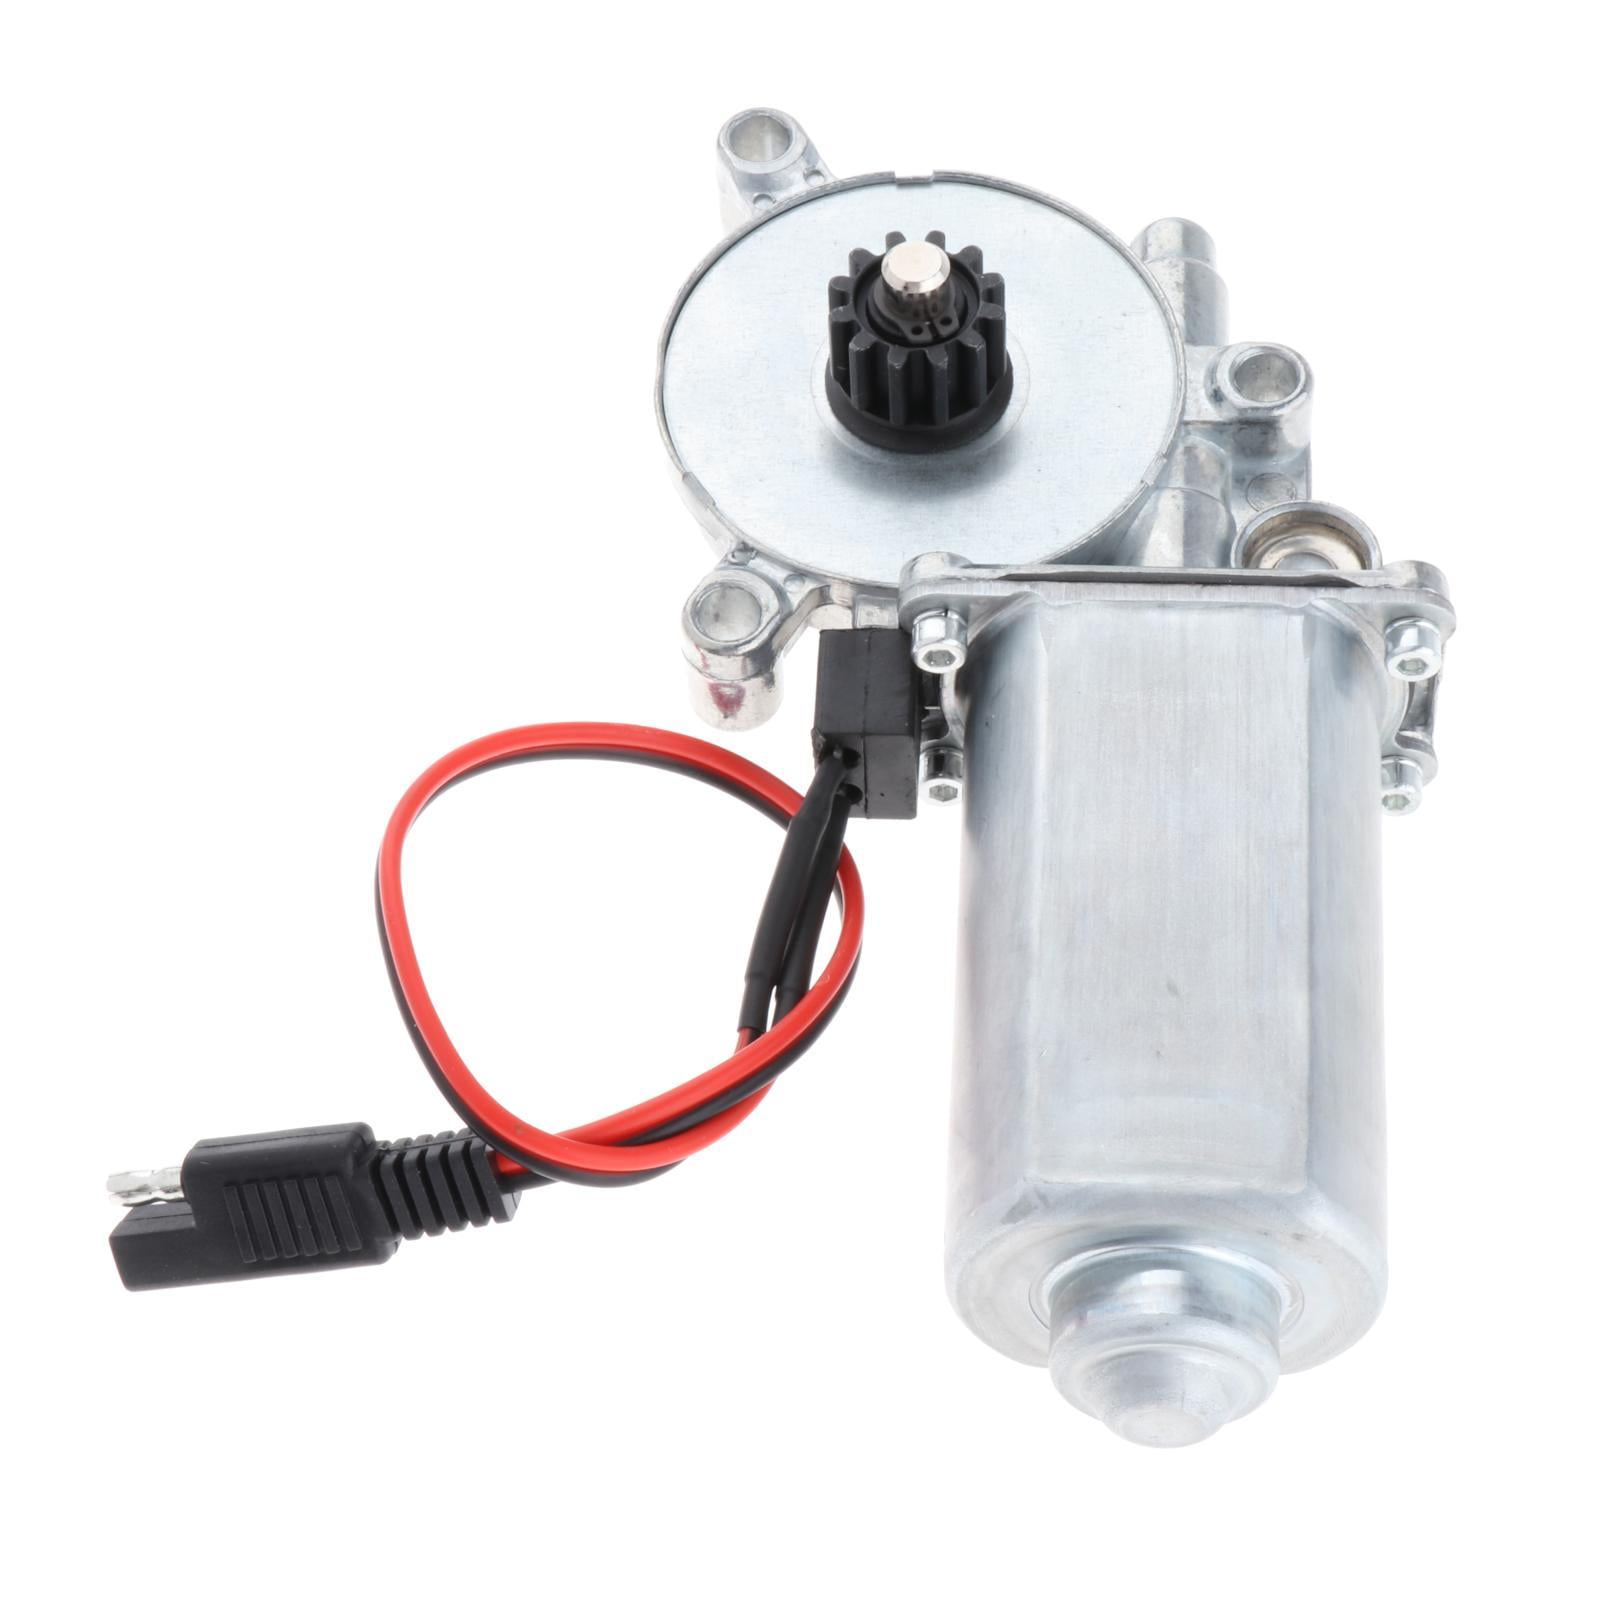 266149 RV Power Venture Awning Replacement Motor 12V DC and 75-RPM Compatible with Dual Connectors Solera Power Awnings 